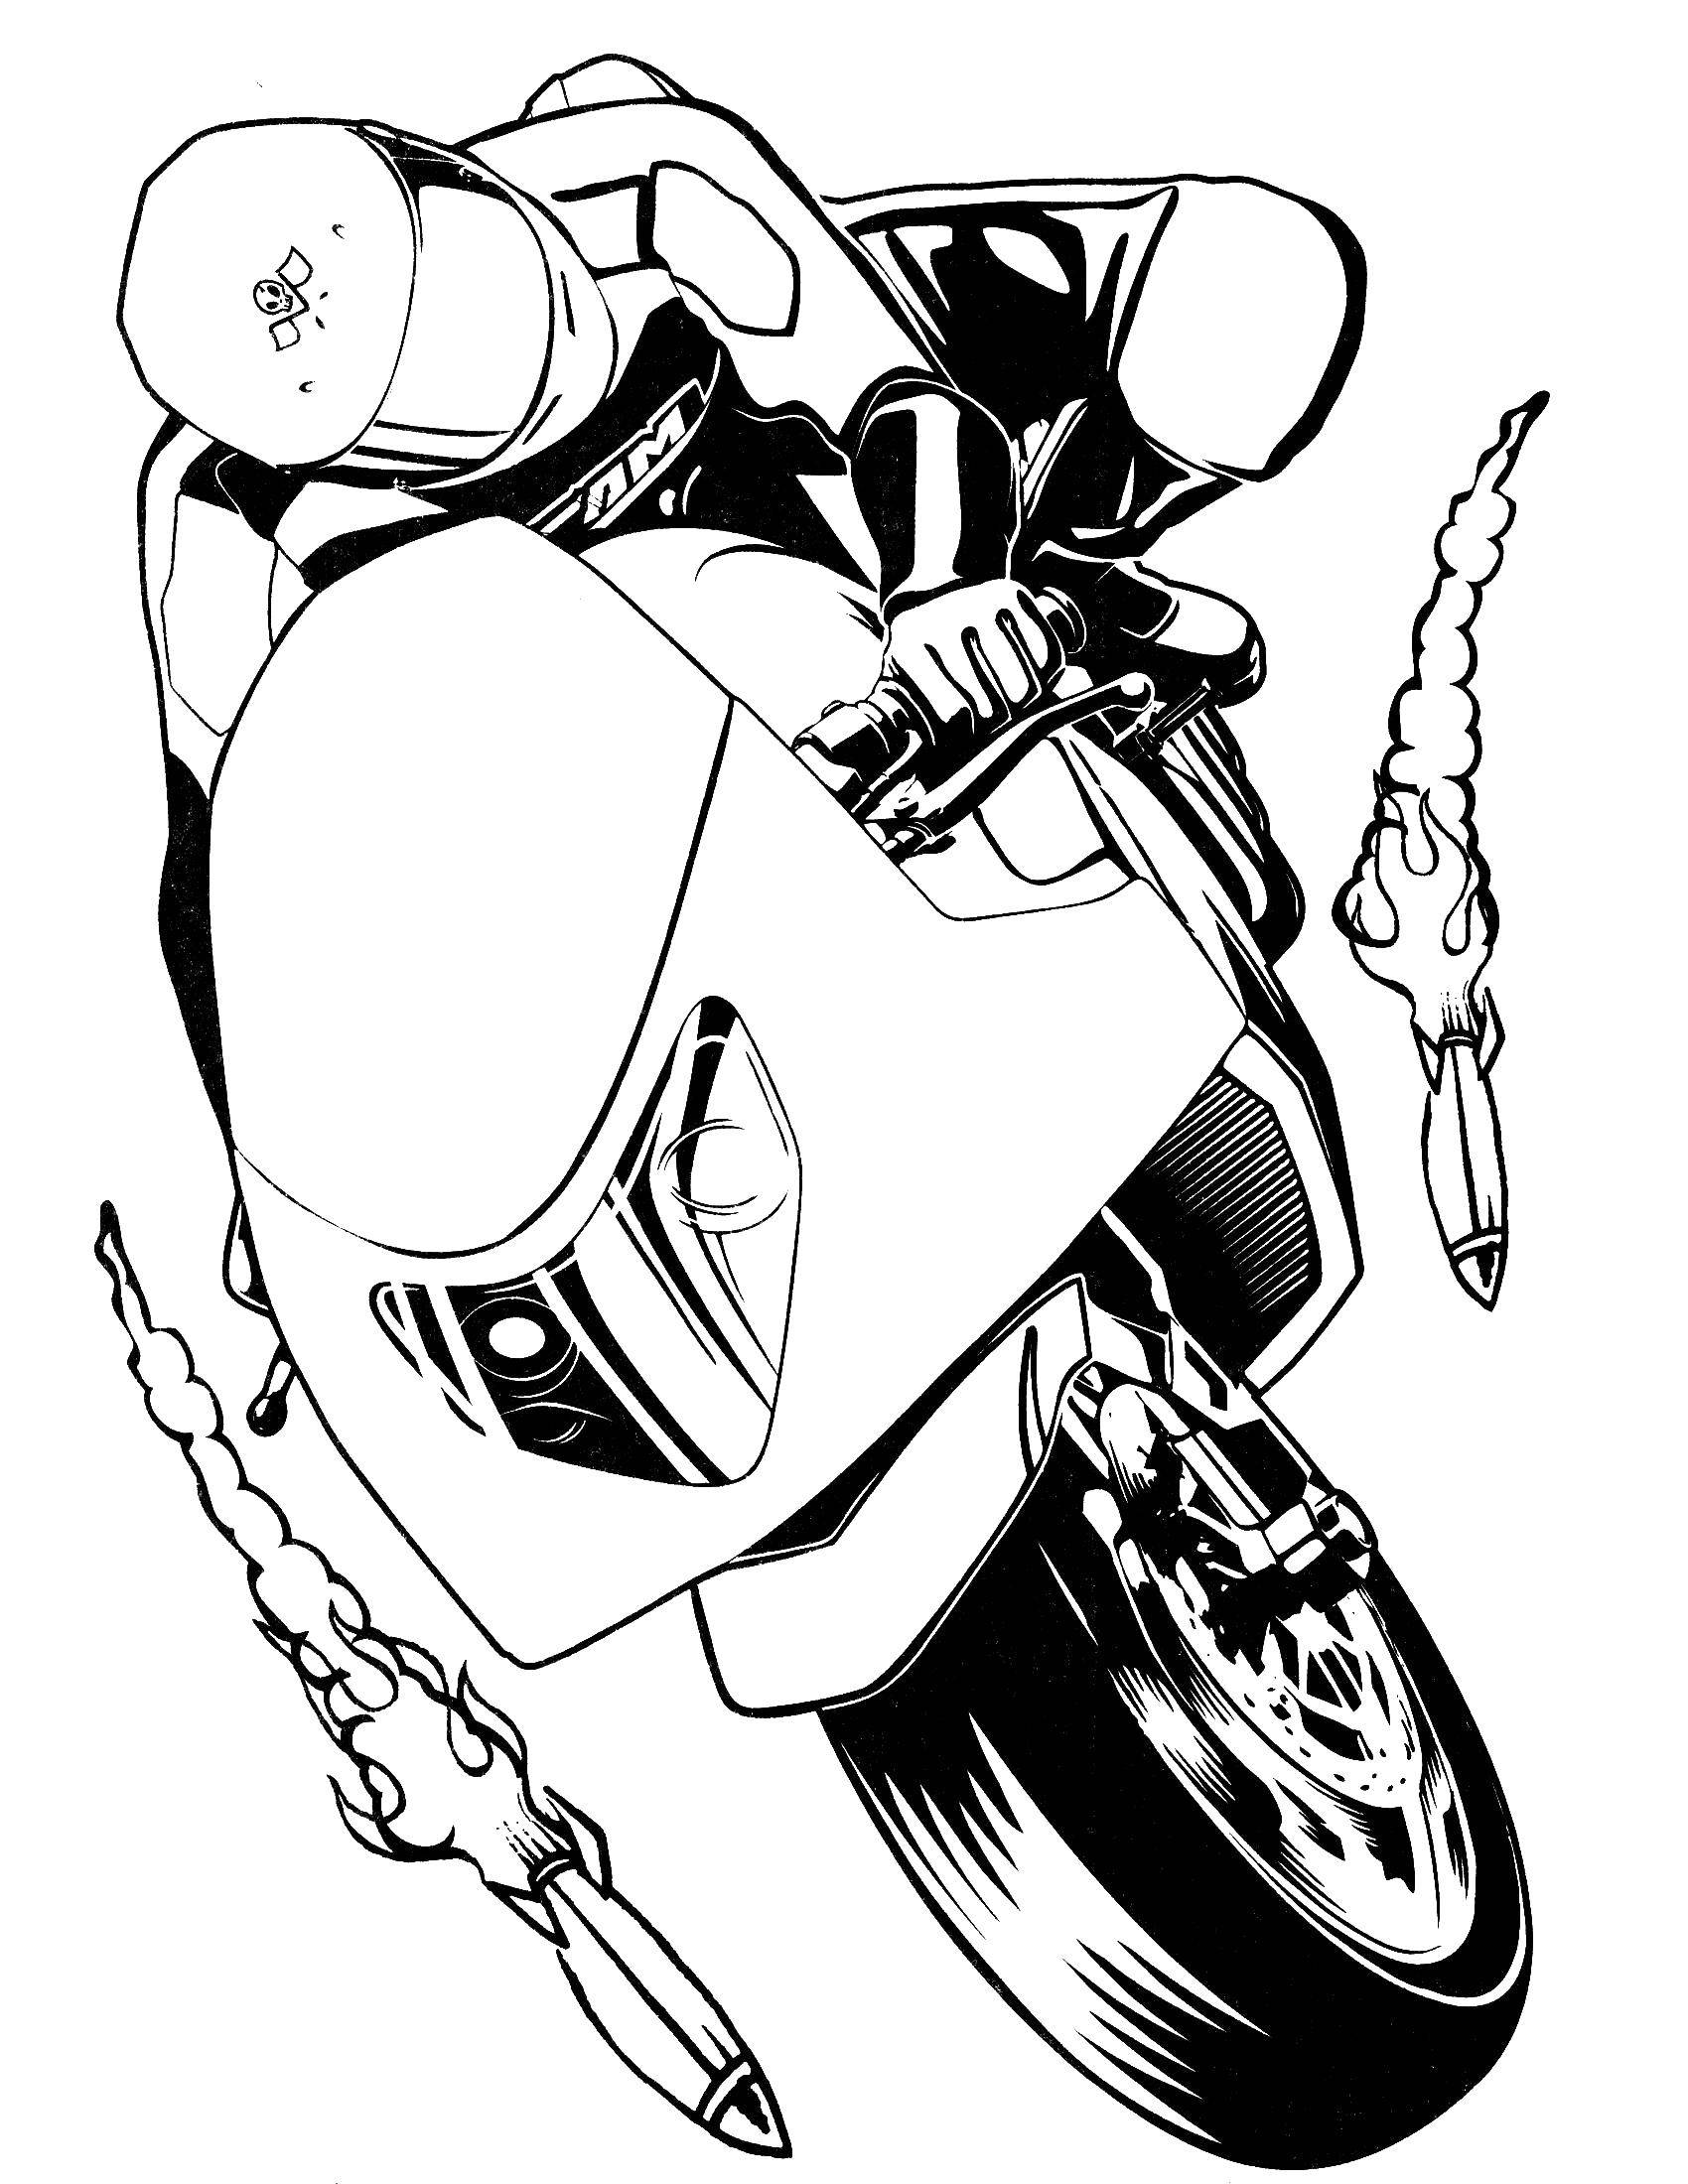 Coloring Motorcyclist. Category machine . Tags:  cars , motorcycle, racer.